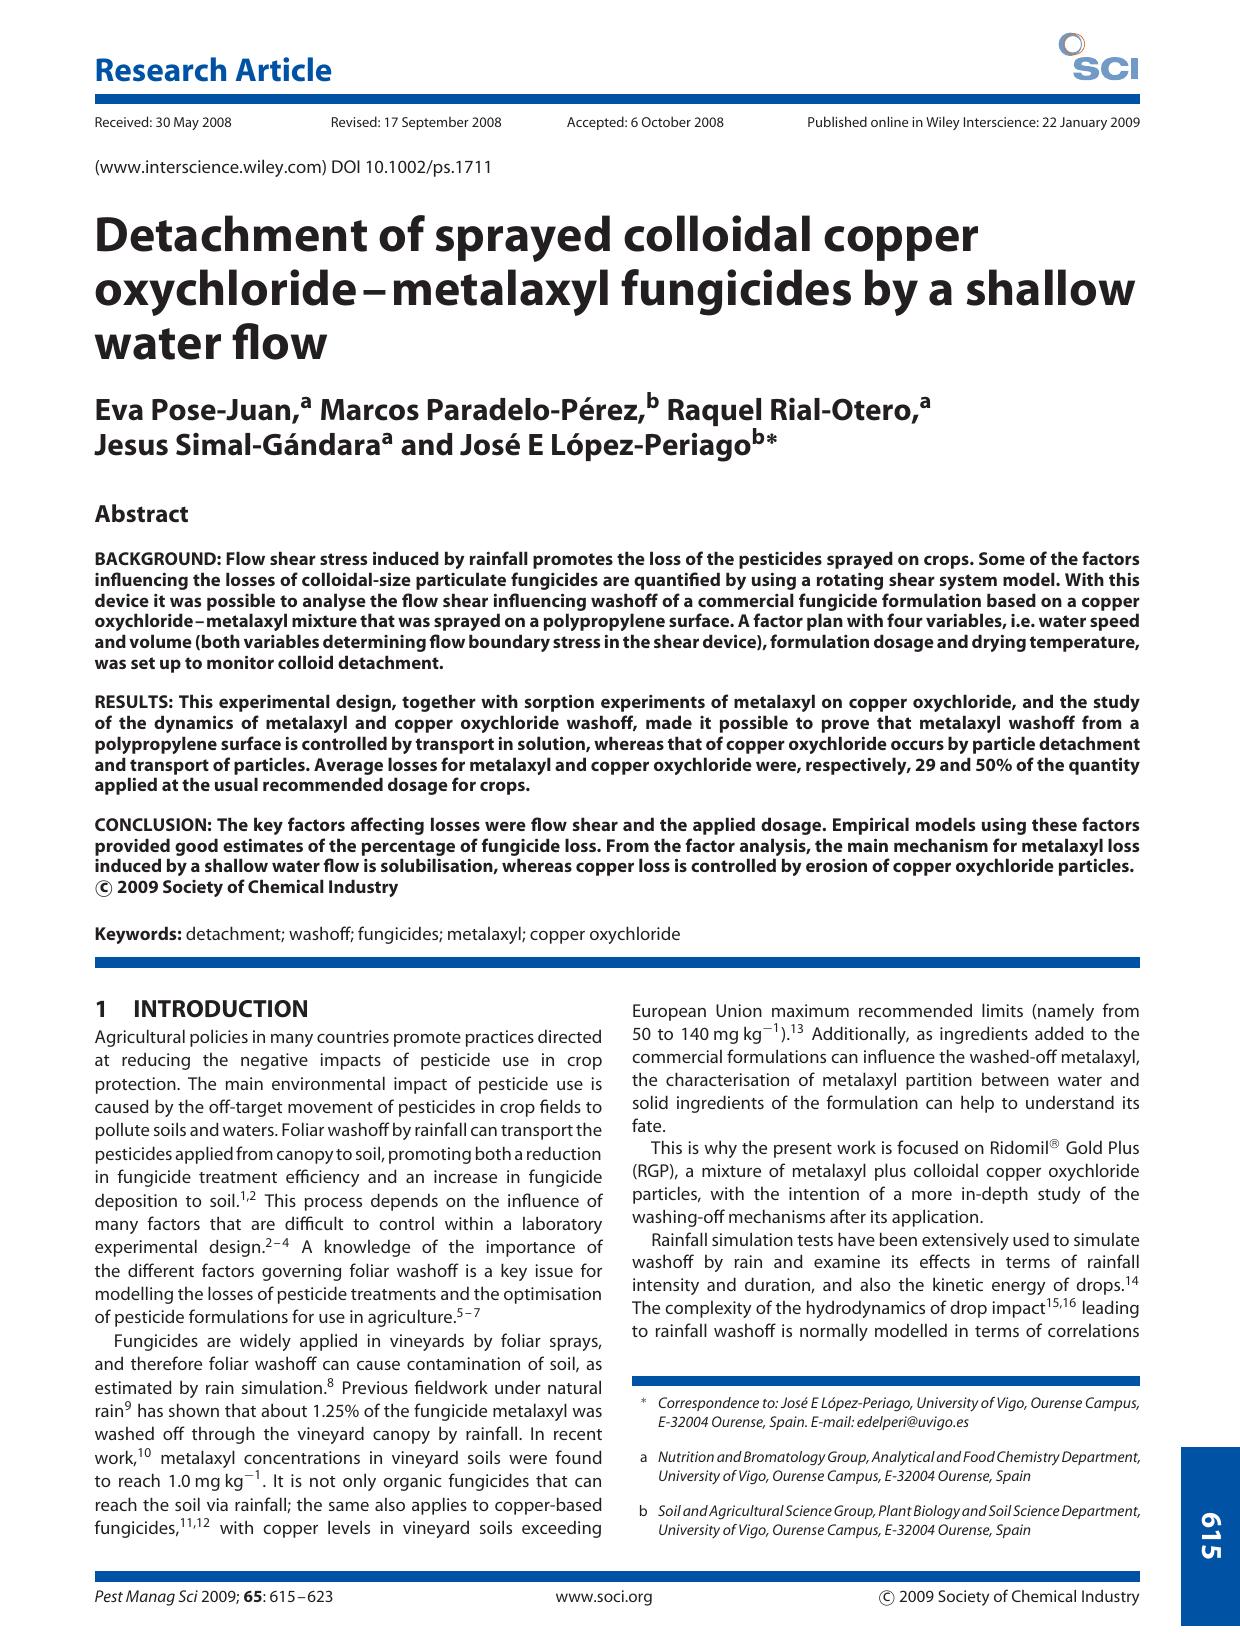 Detachment of sprayed colloidal copper oxychloride-metalaxyl fungicides by a shallow water flow by Unknown